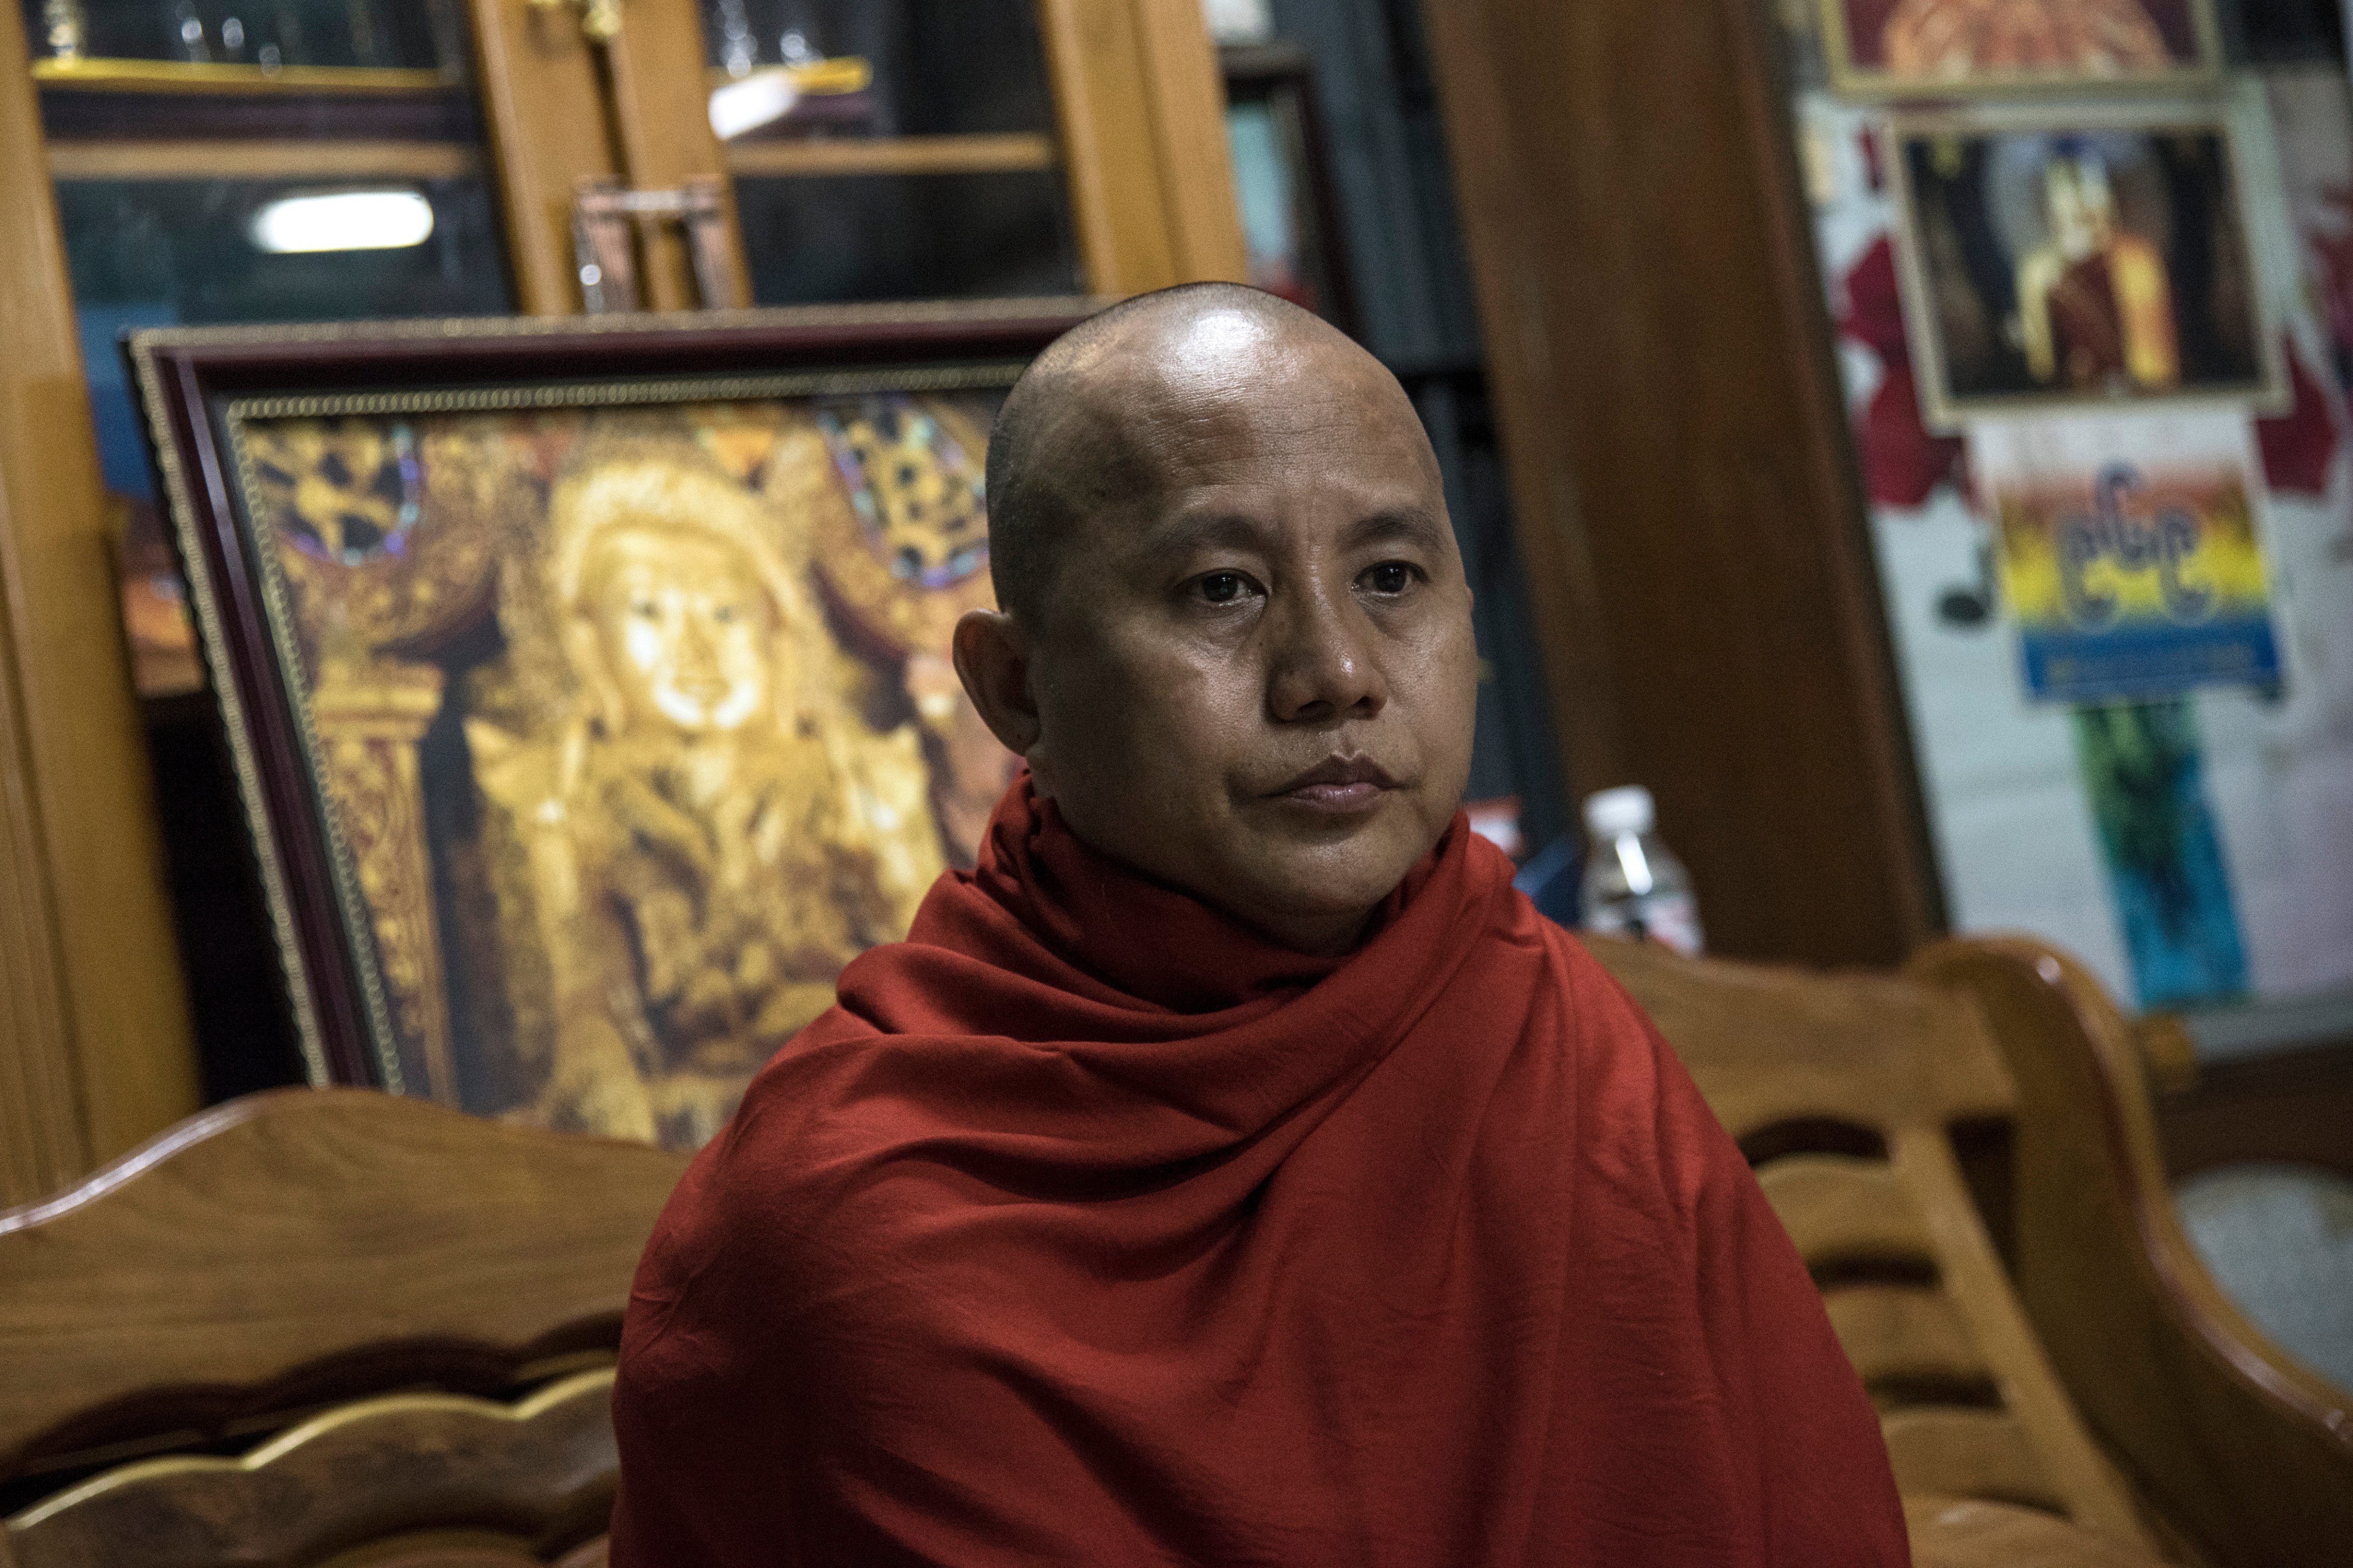 Buddhist monk Wirathu sits in his quarters at Ma Soe Yein monastery in Mandalay, Myanmar on May 25, 2015. (Thierry Falise—LightRocket/Getty Images)